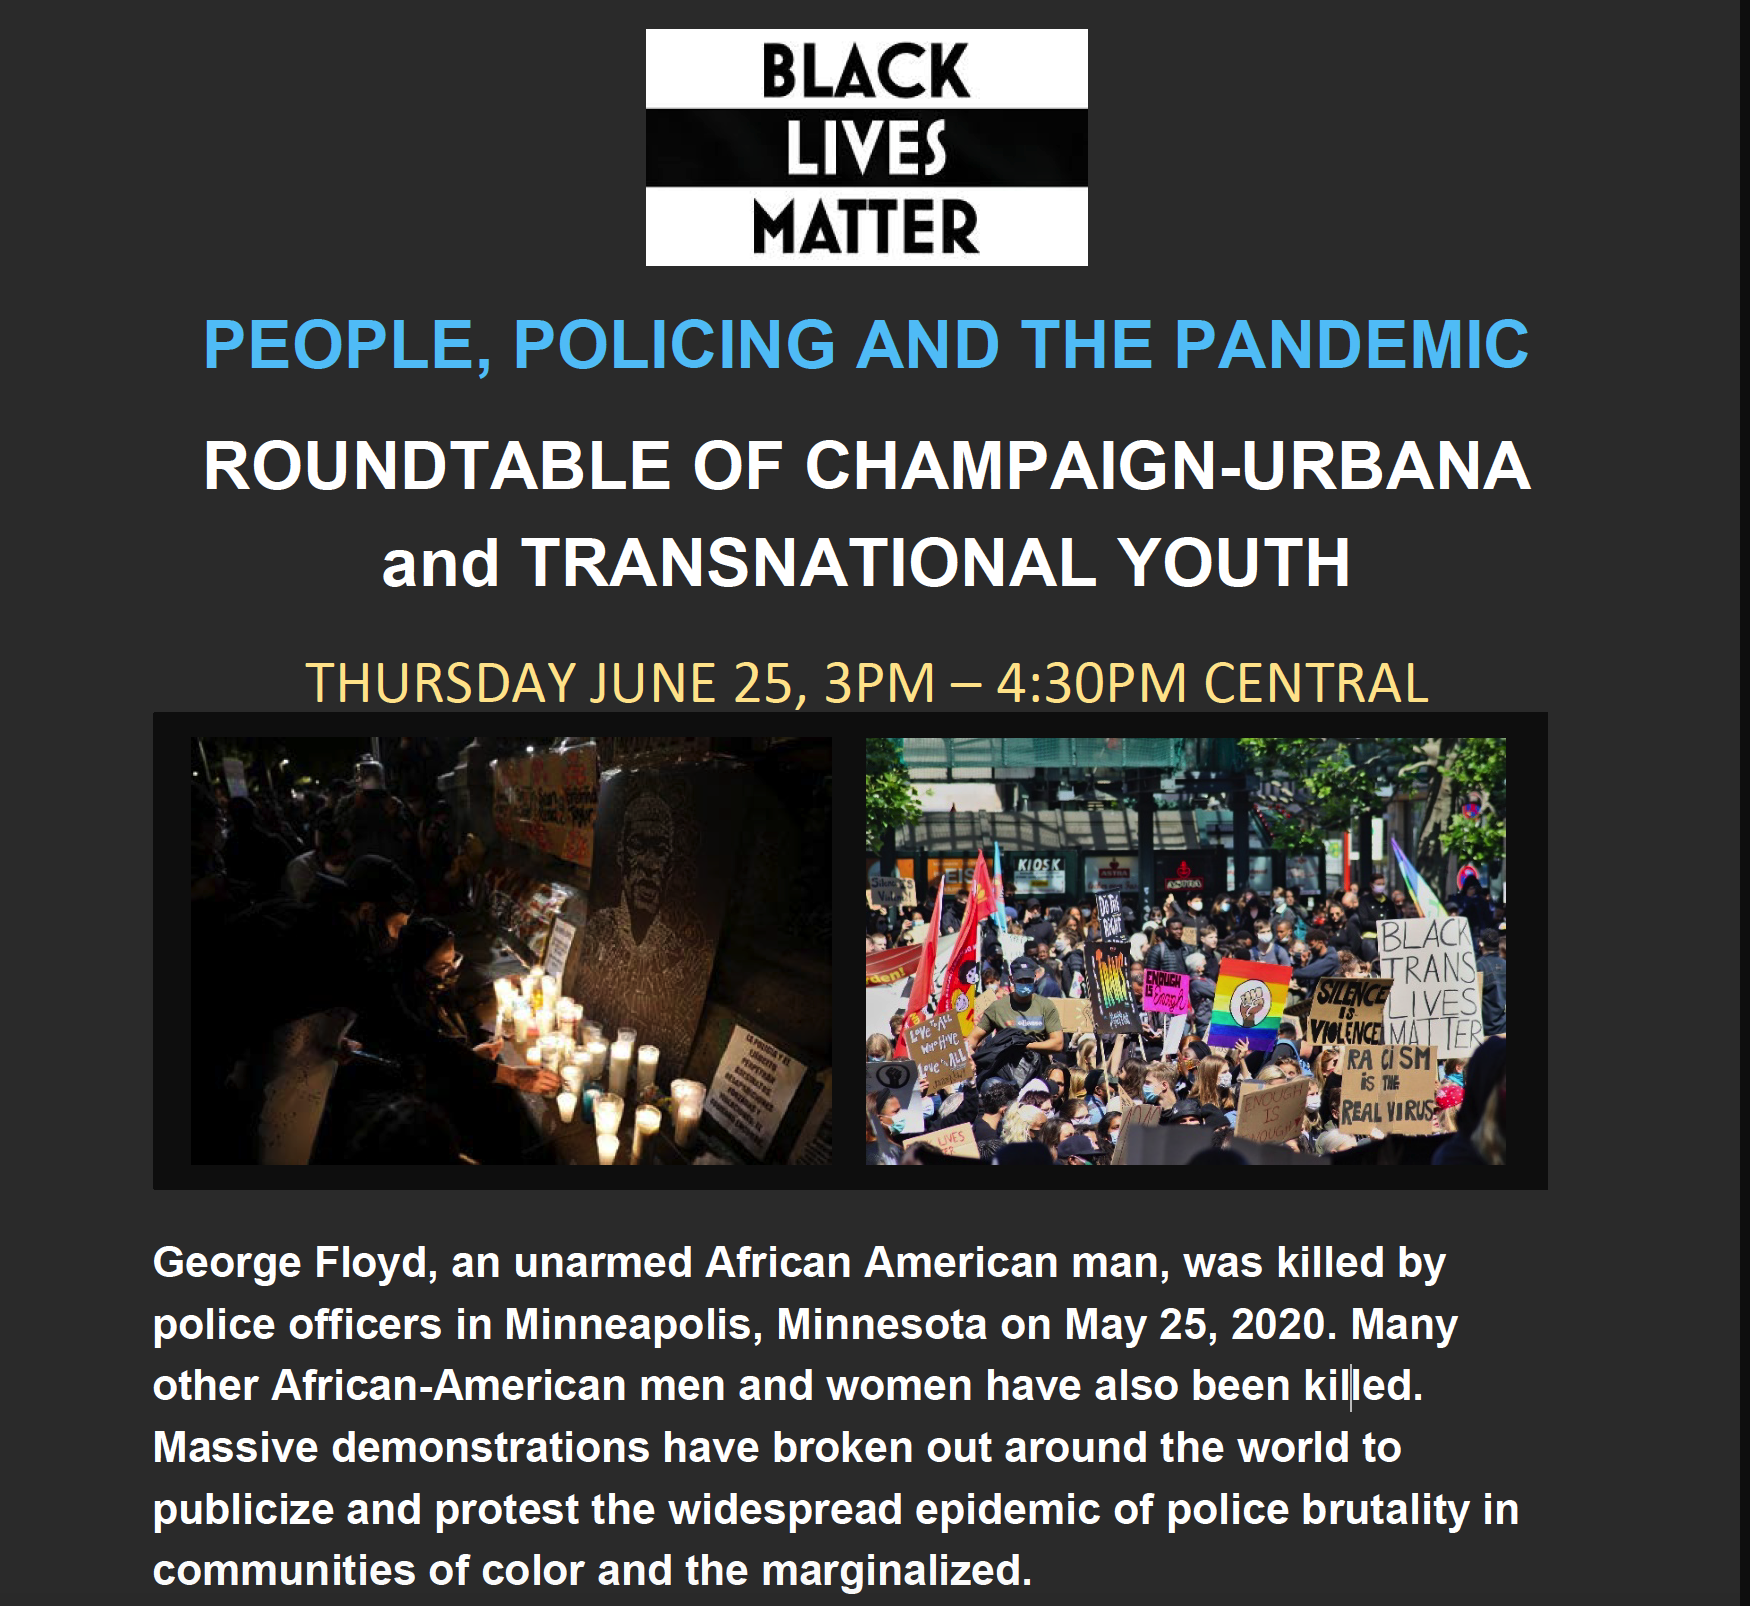 IMAGE: Flyer for the roundtable discussion of Champaign-Urbana and Transnational Youth.